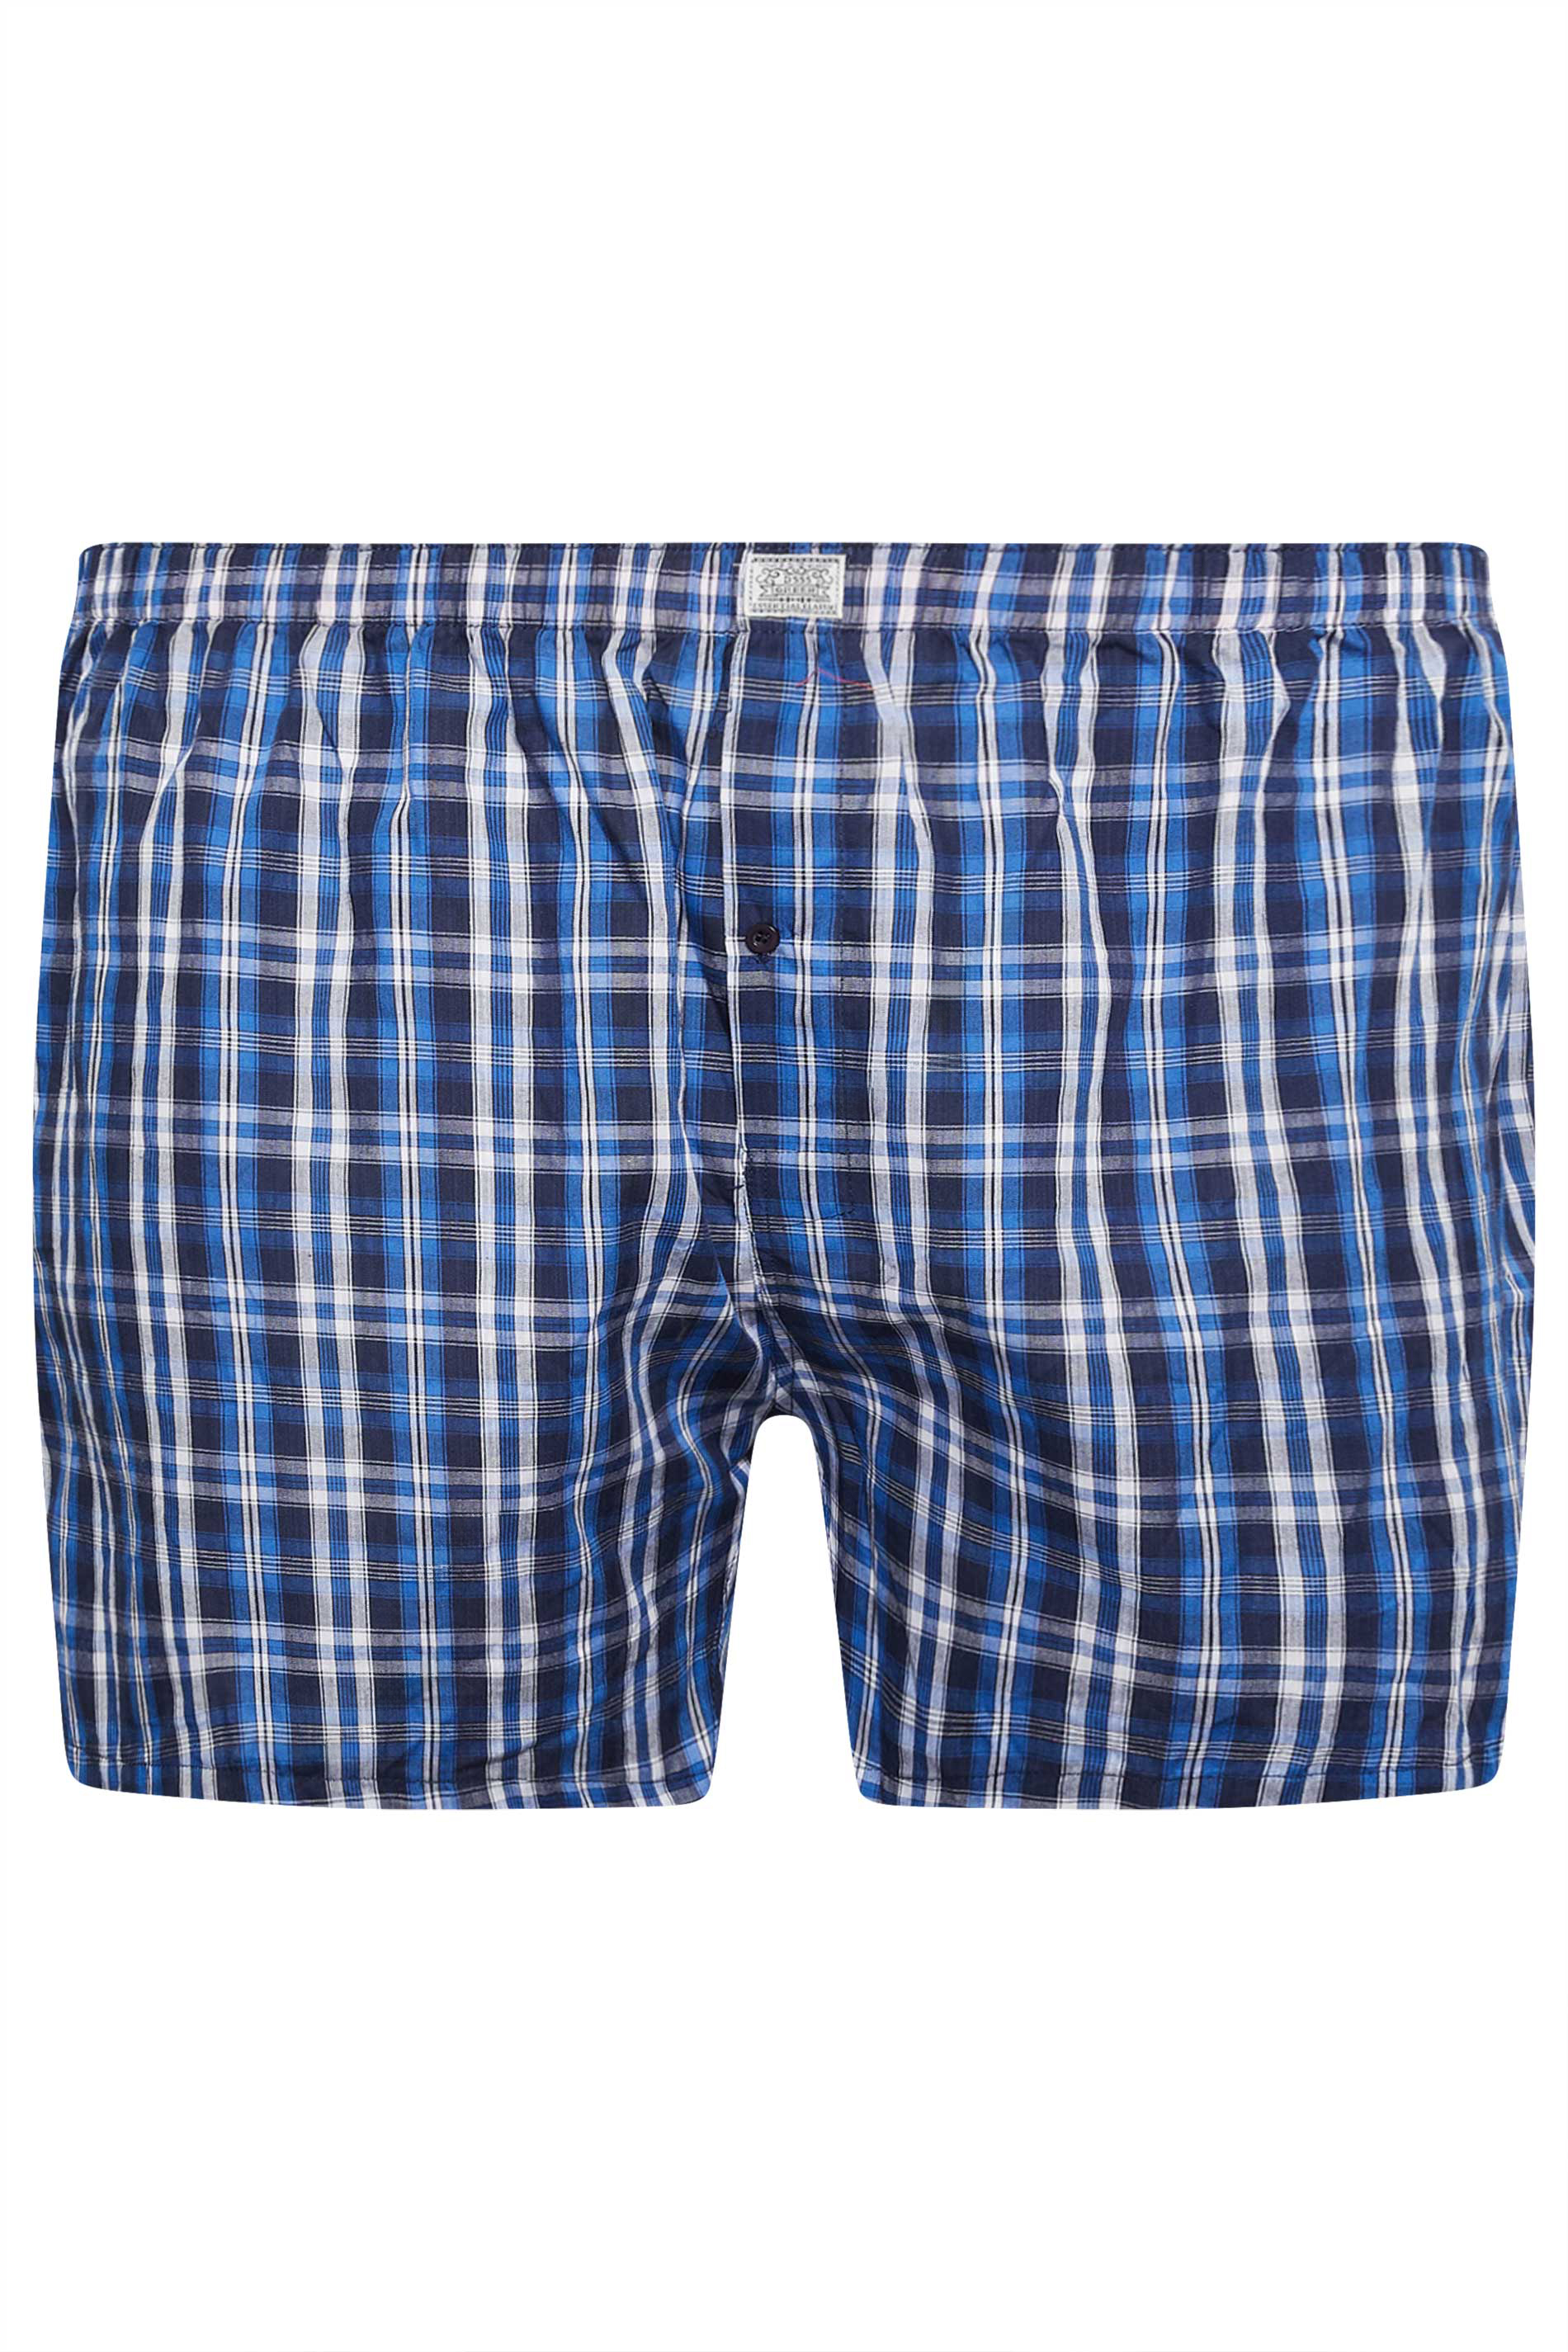 D555 Big & Tall 2 PACK Blue & Red Check Print Boxers | BadRhino